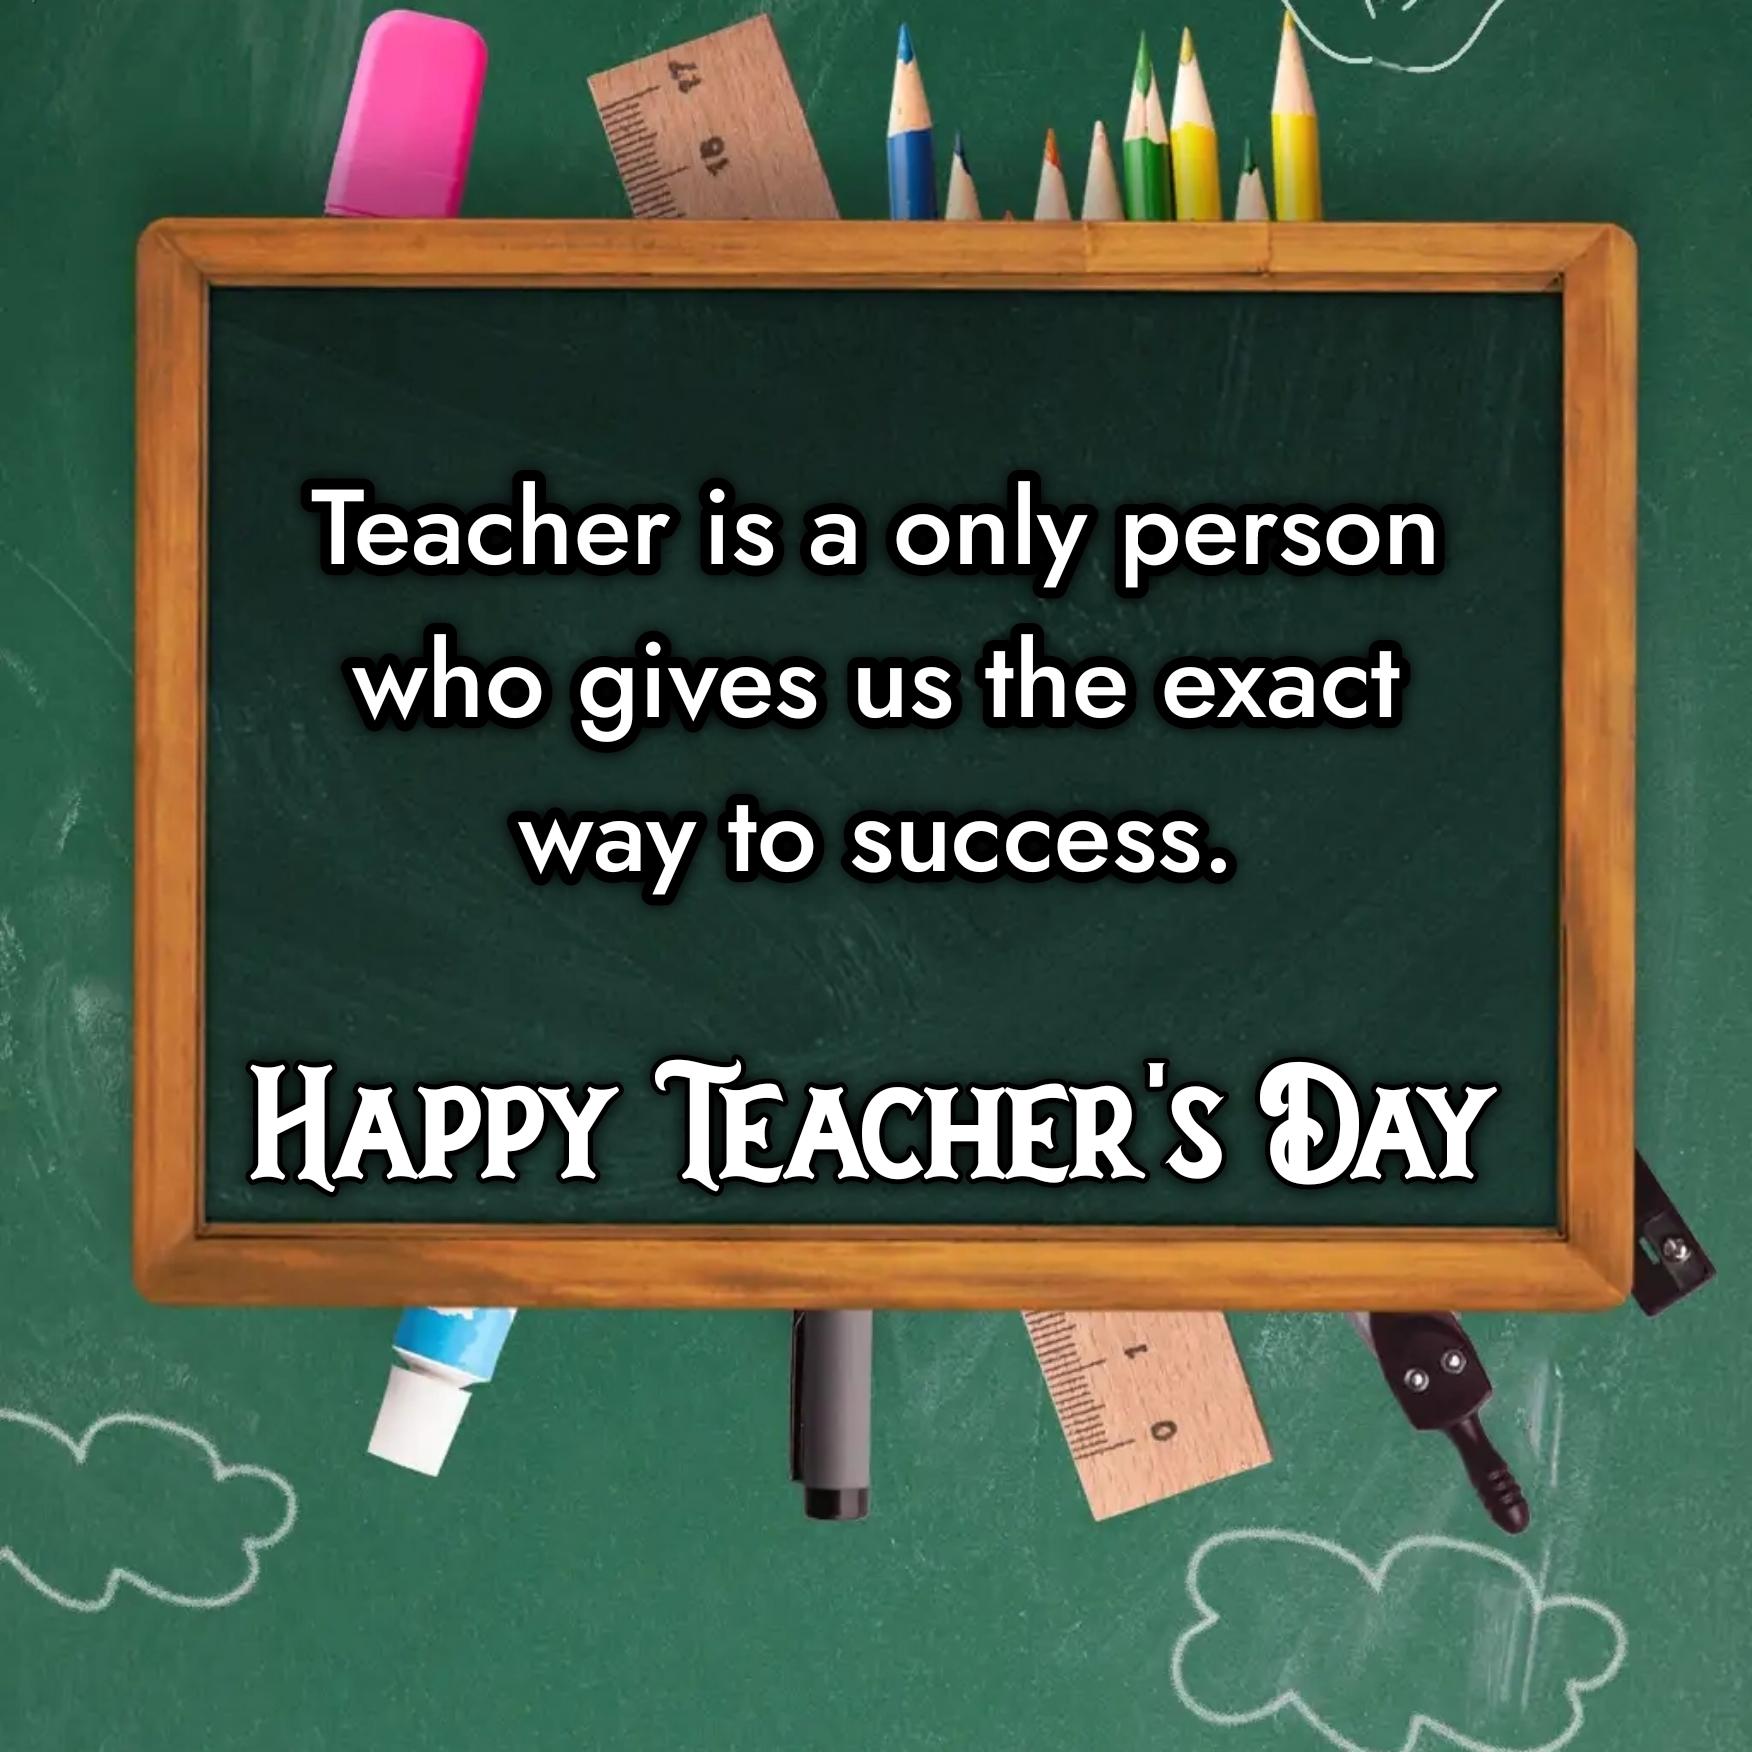 Teacher is a only person who gives us the exact way to success